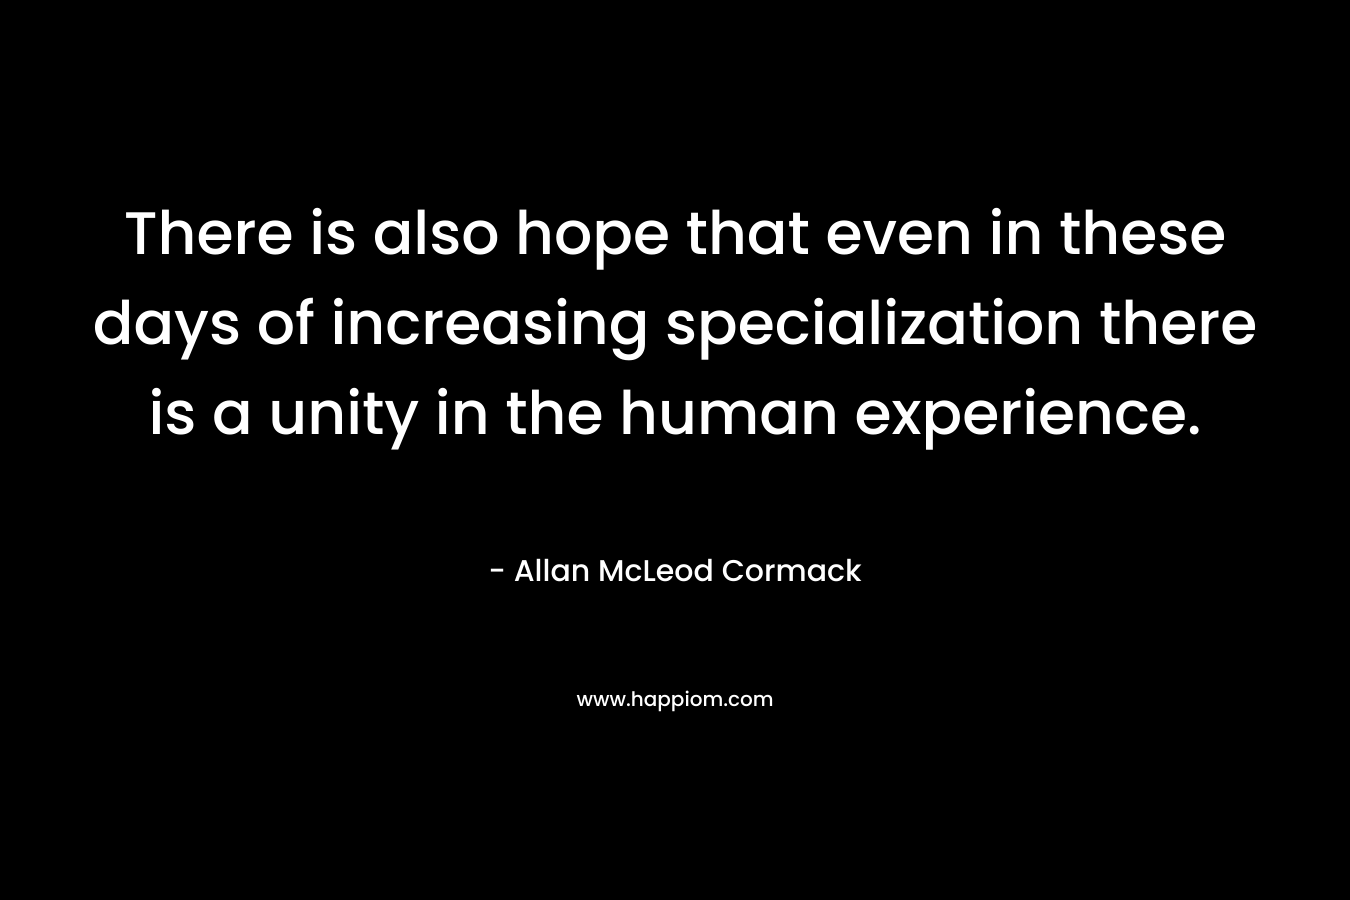 There is also hope that even in these days of increasing specialization there is a unity in the human experience. – Allan McLeod Cormack